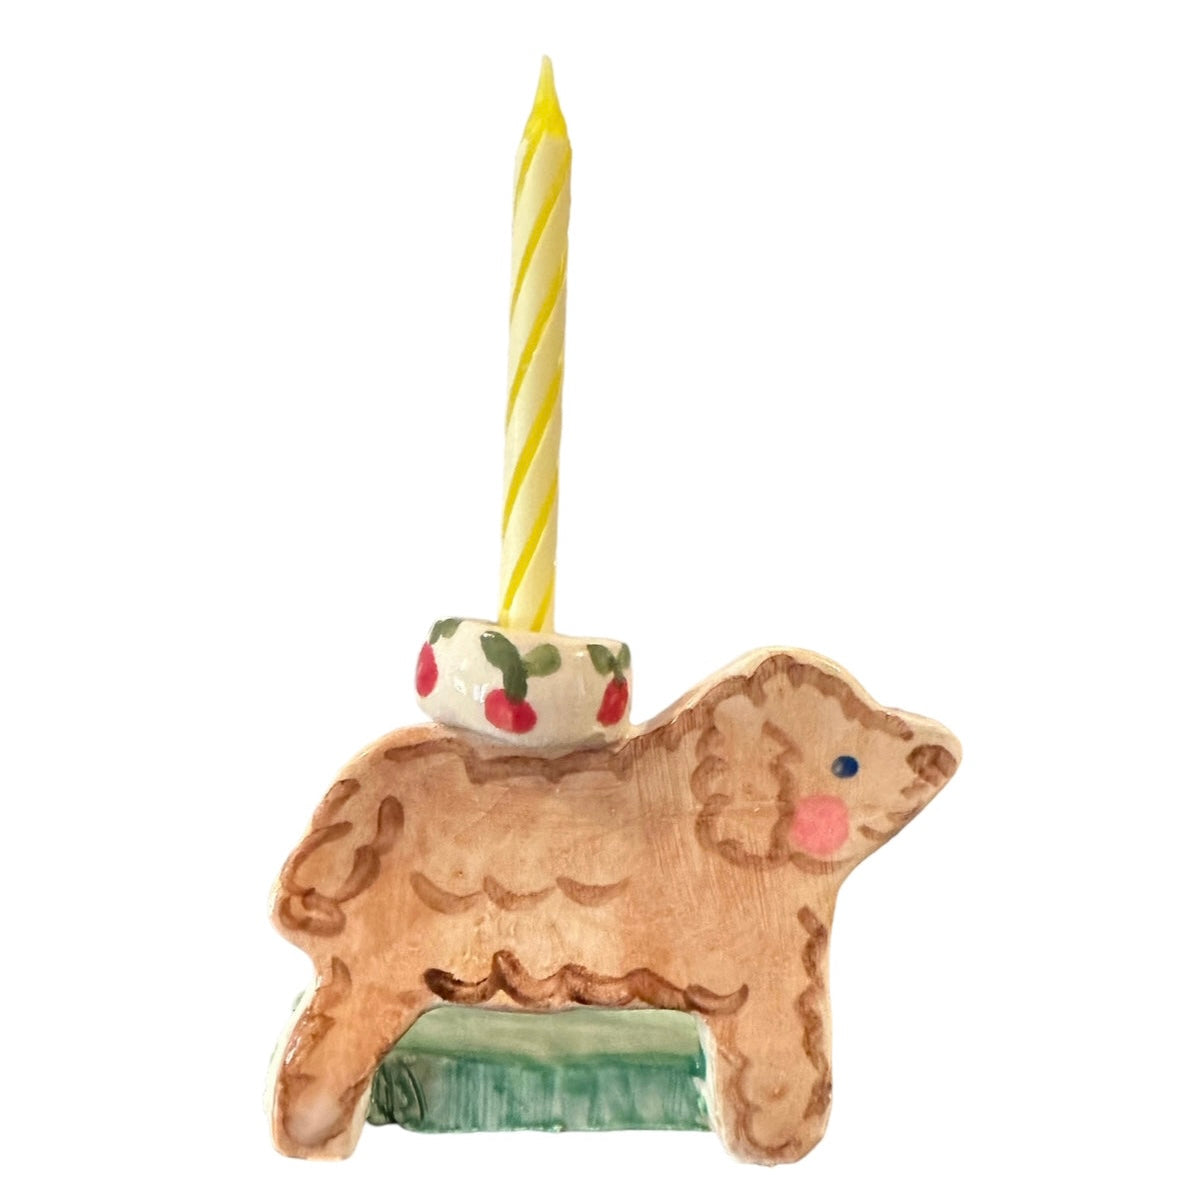 Cake Topper - Curly Dog - Premium Cake Topper from Tricia Lowenfield Design 